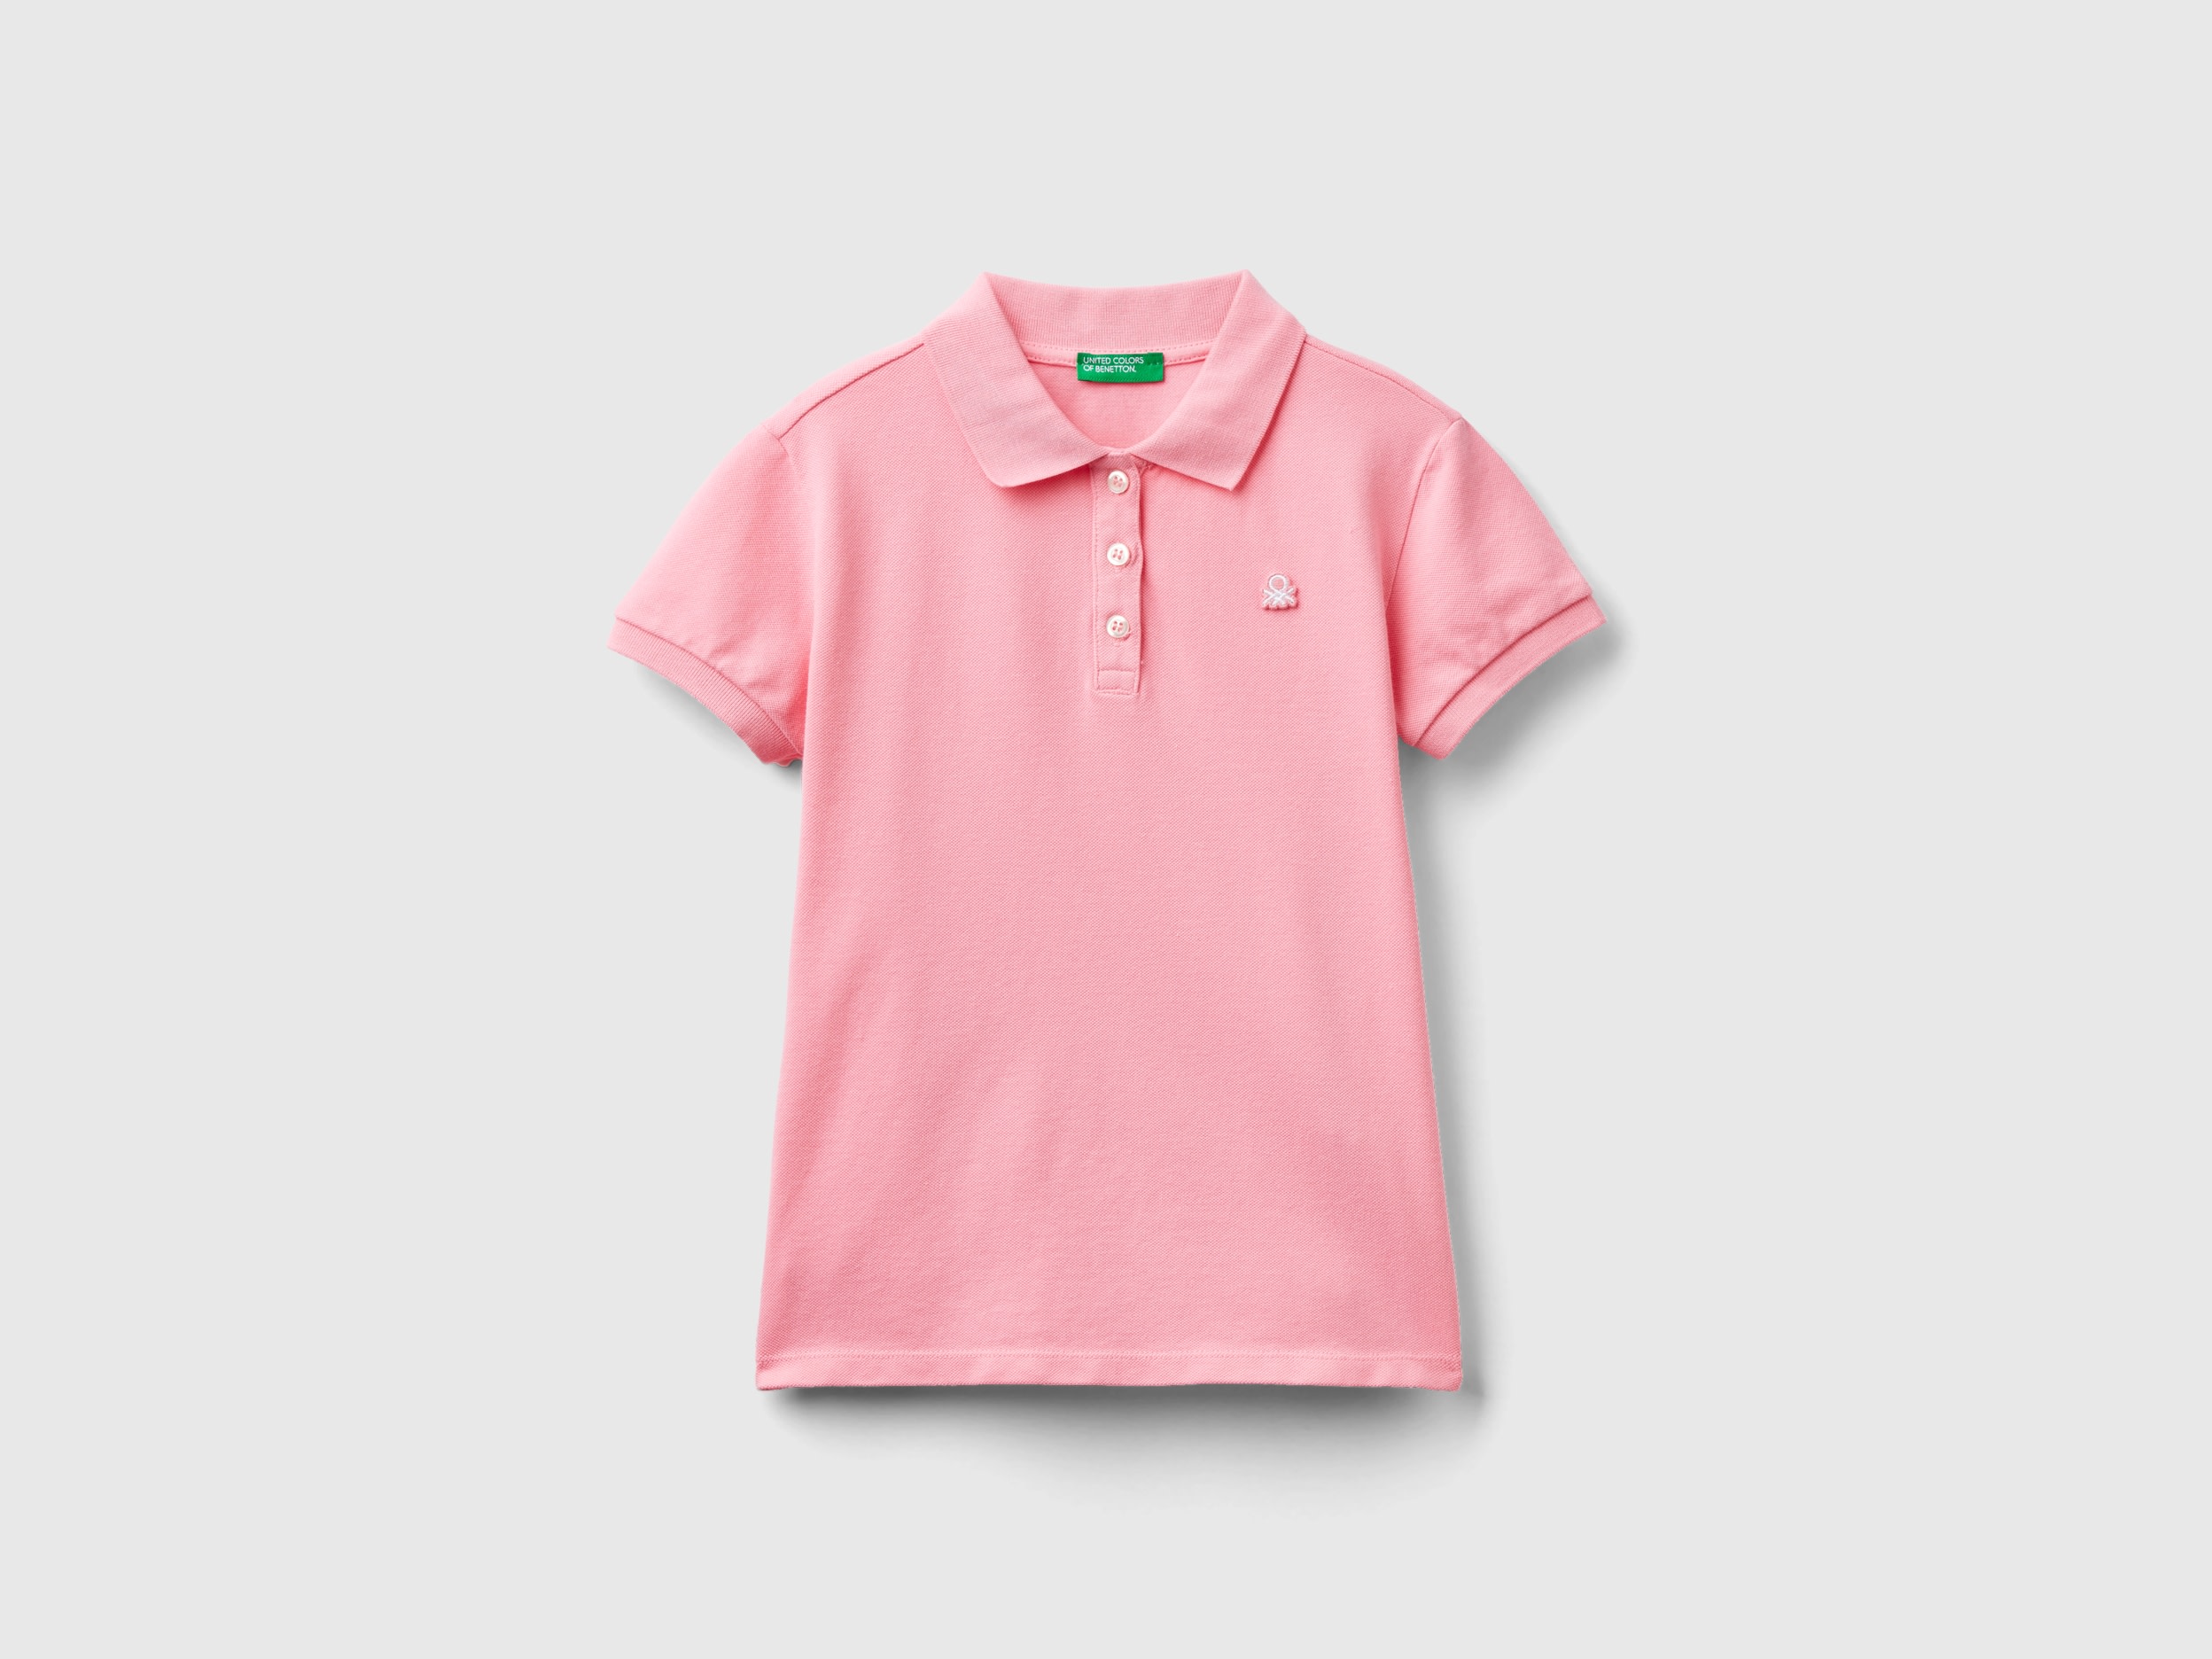 Image of Benetton, Short Sleeve Polo In Organic Cotton, size M, Pink, Kids